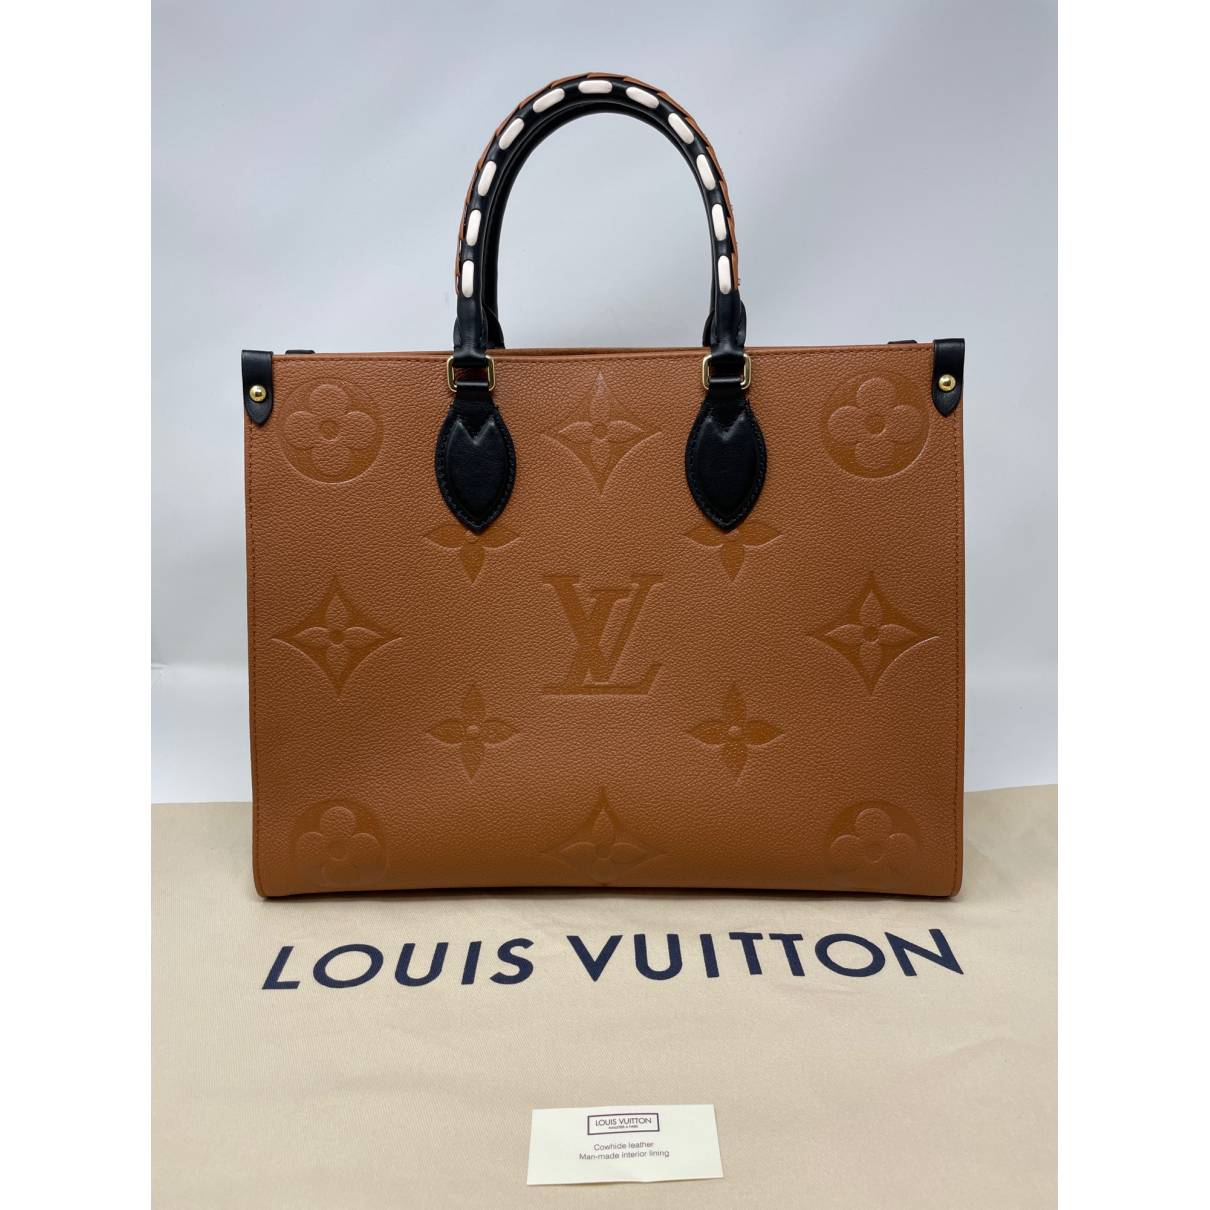 NEW Louis Vuitton OnTheGo GM Jungle Print Tote Black & Caramel On The Go